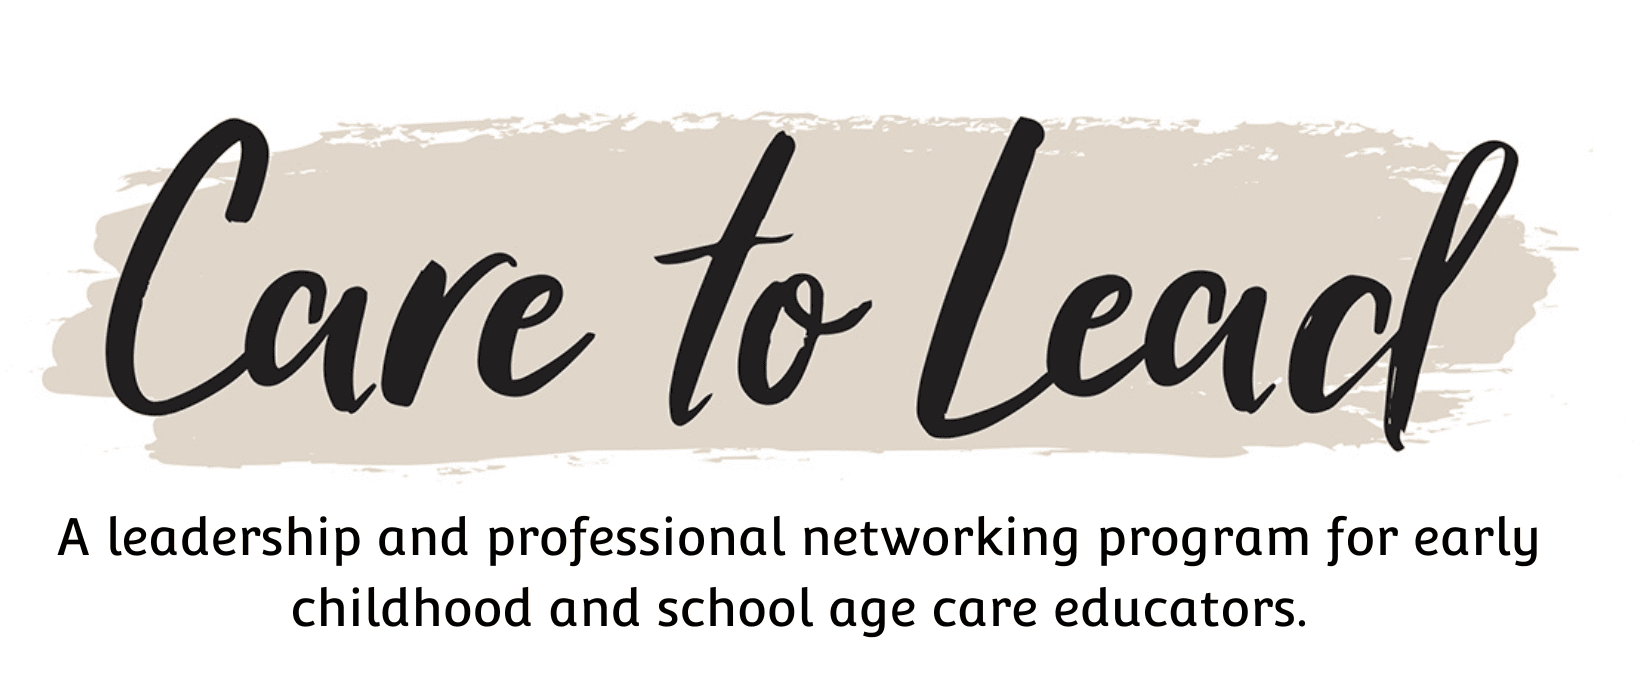 Care to lead - A leadership and professional networking program for early childhood and school age care educators.